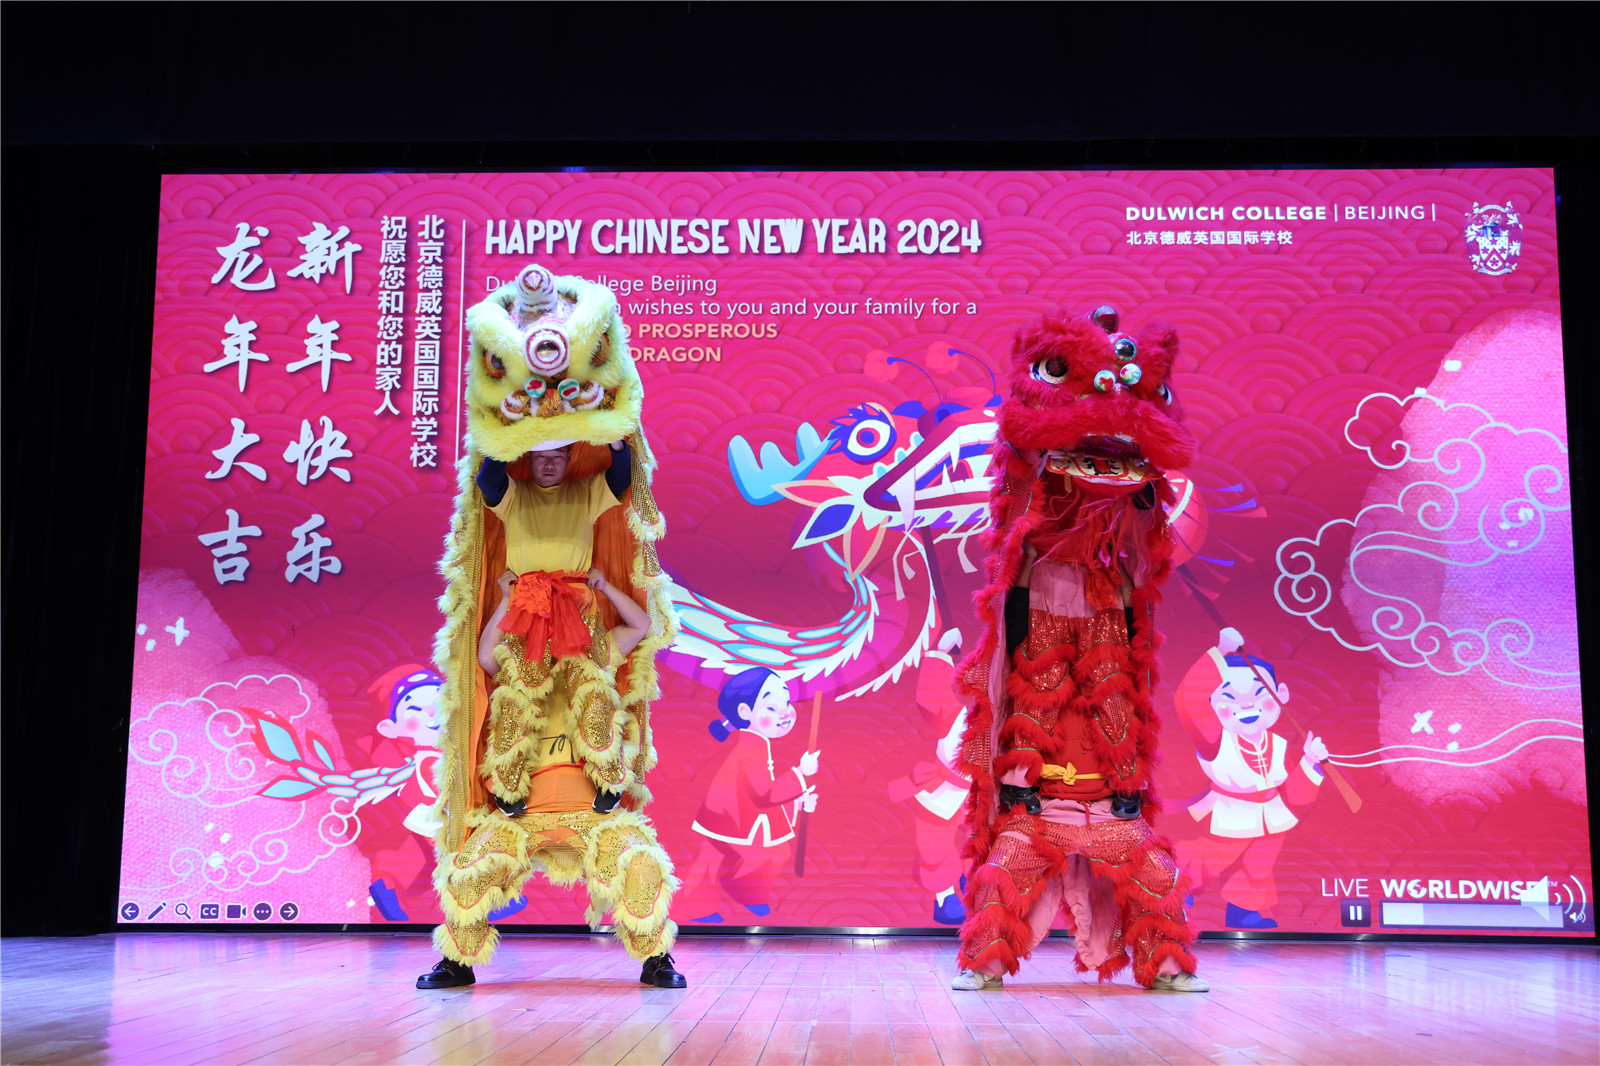 Chinese New Year celebrations - Lion dance